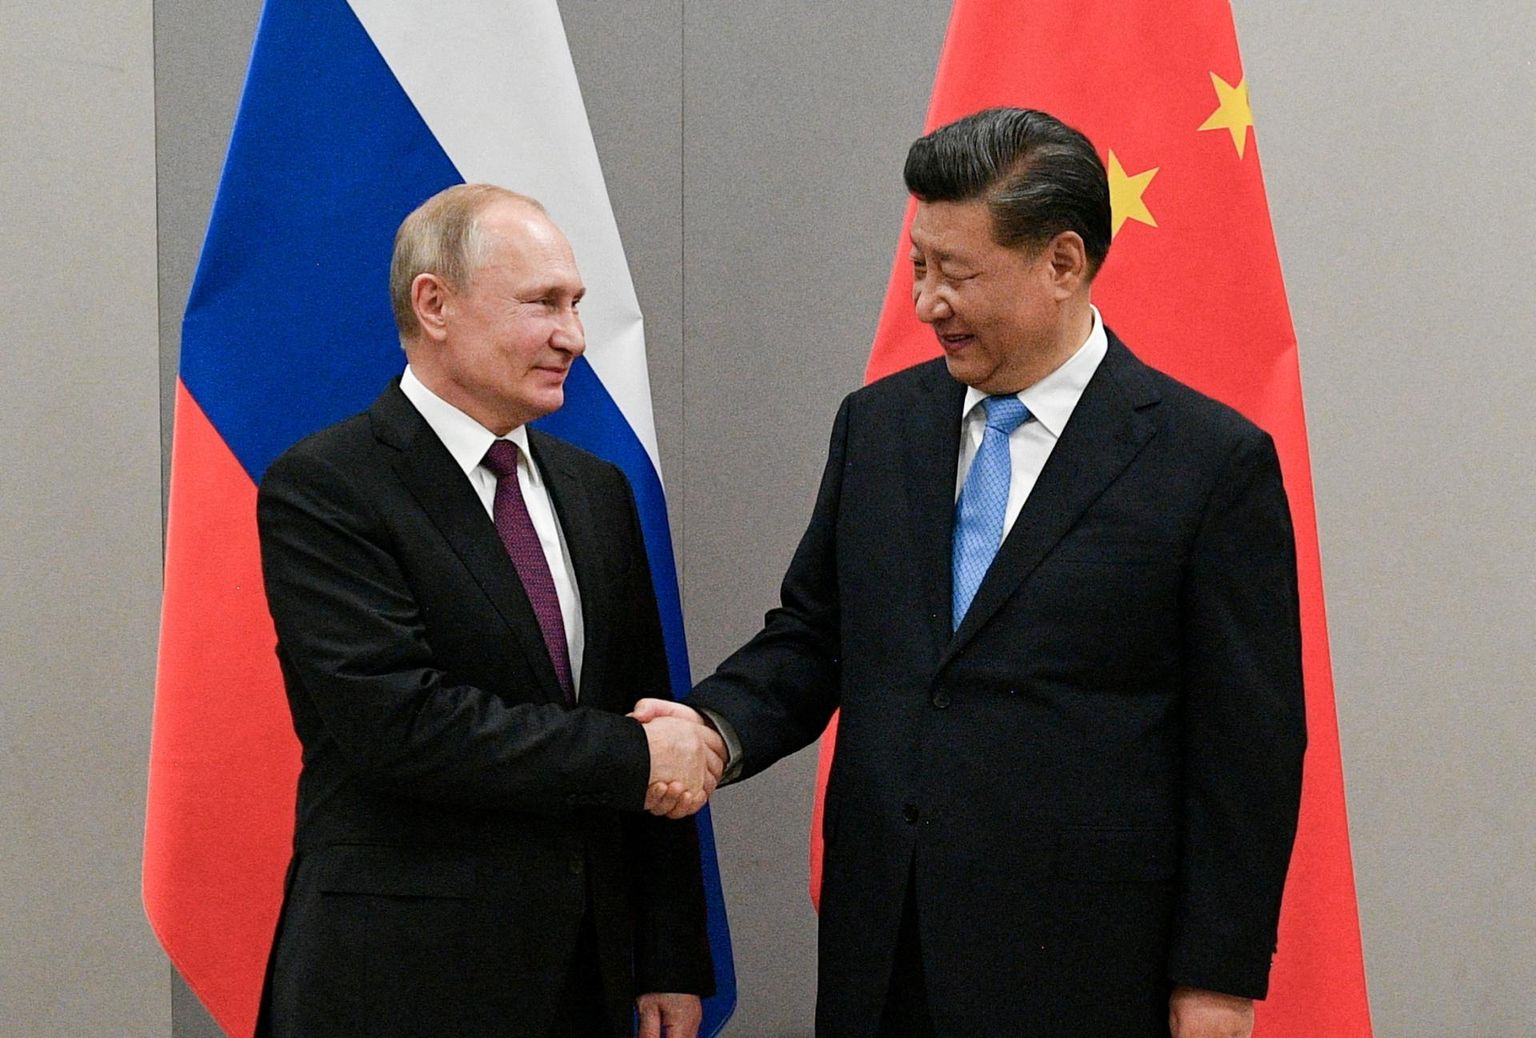 Chinese President Xi Jinping and Russian President Vladimir Putin. In the Russian-Ukrainian war, China has chosen Russia. Similarly, China is increasingly criticizing the European security architecture.